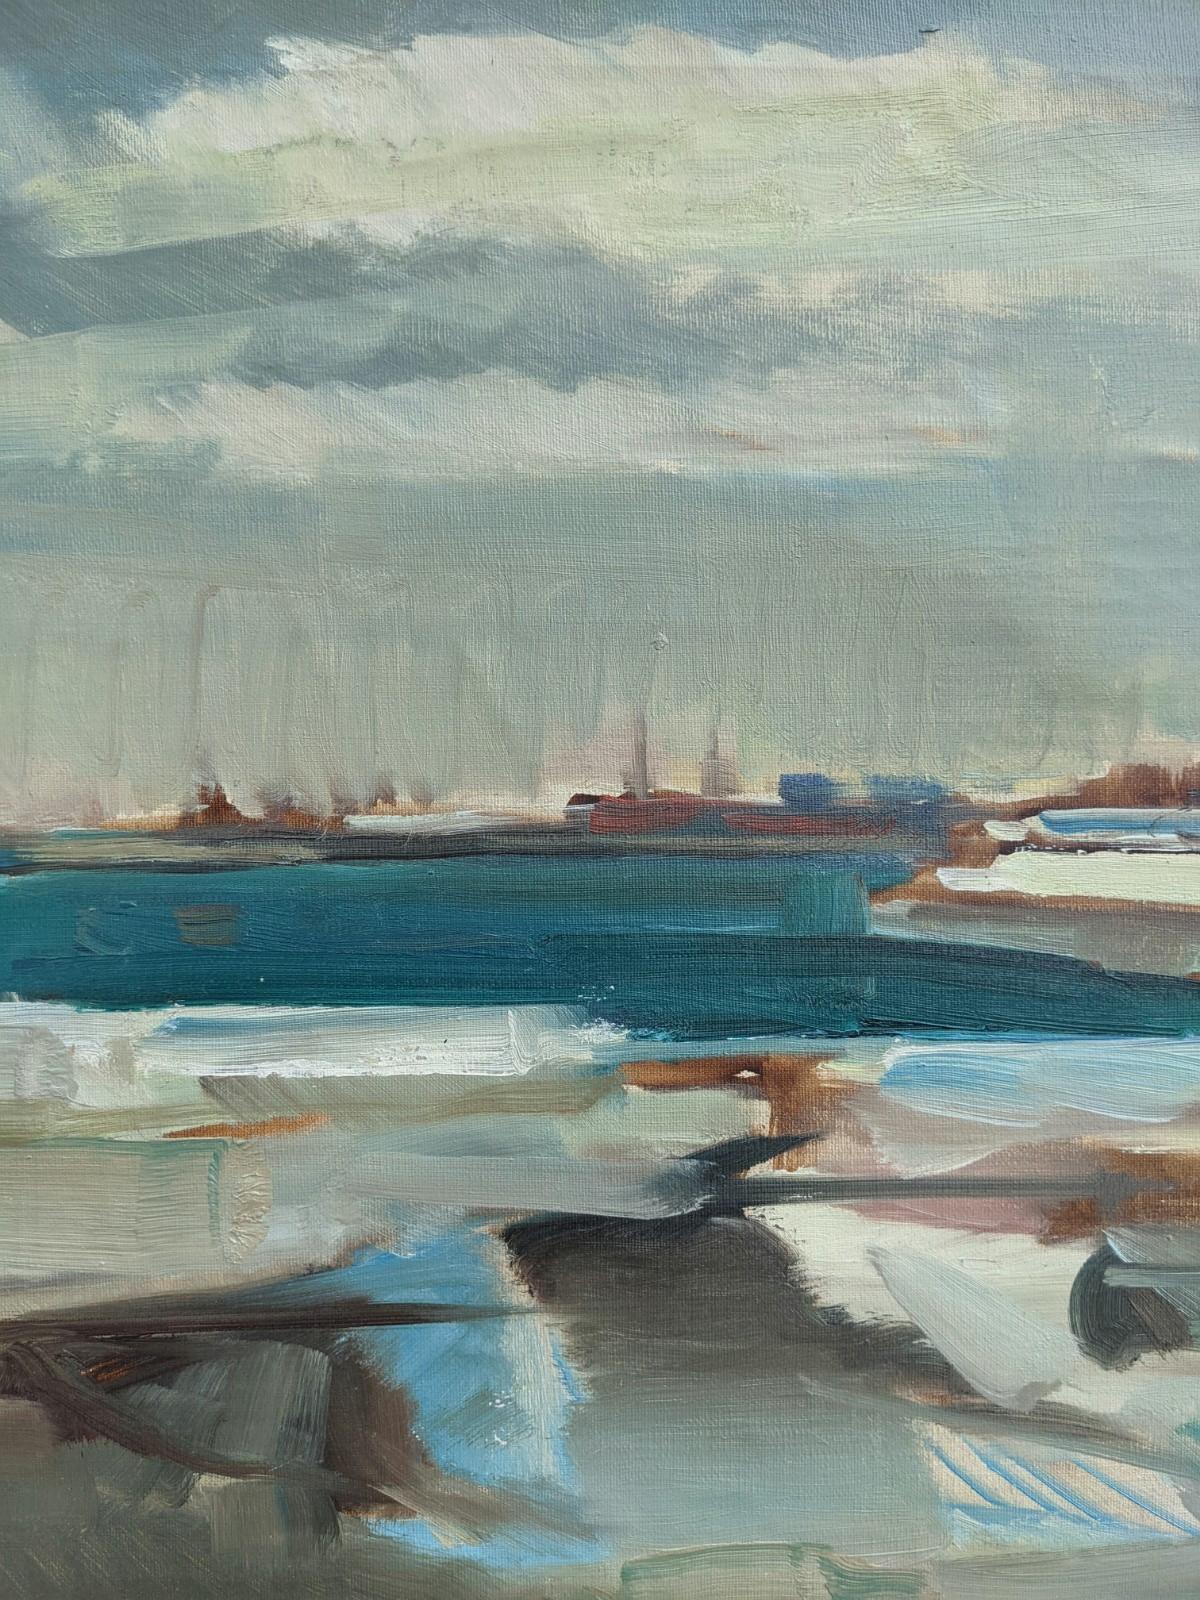 COAST IN BLUE
Size: 57 x 62cm (including frame)
Oil on canvas

A spirited mid century semi abstract oil, painted onto canvas.

Using a restrained palette, the artist has captured the ever changing nature of the coastal landscape and sky – broad,